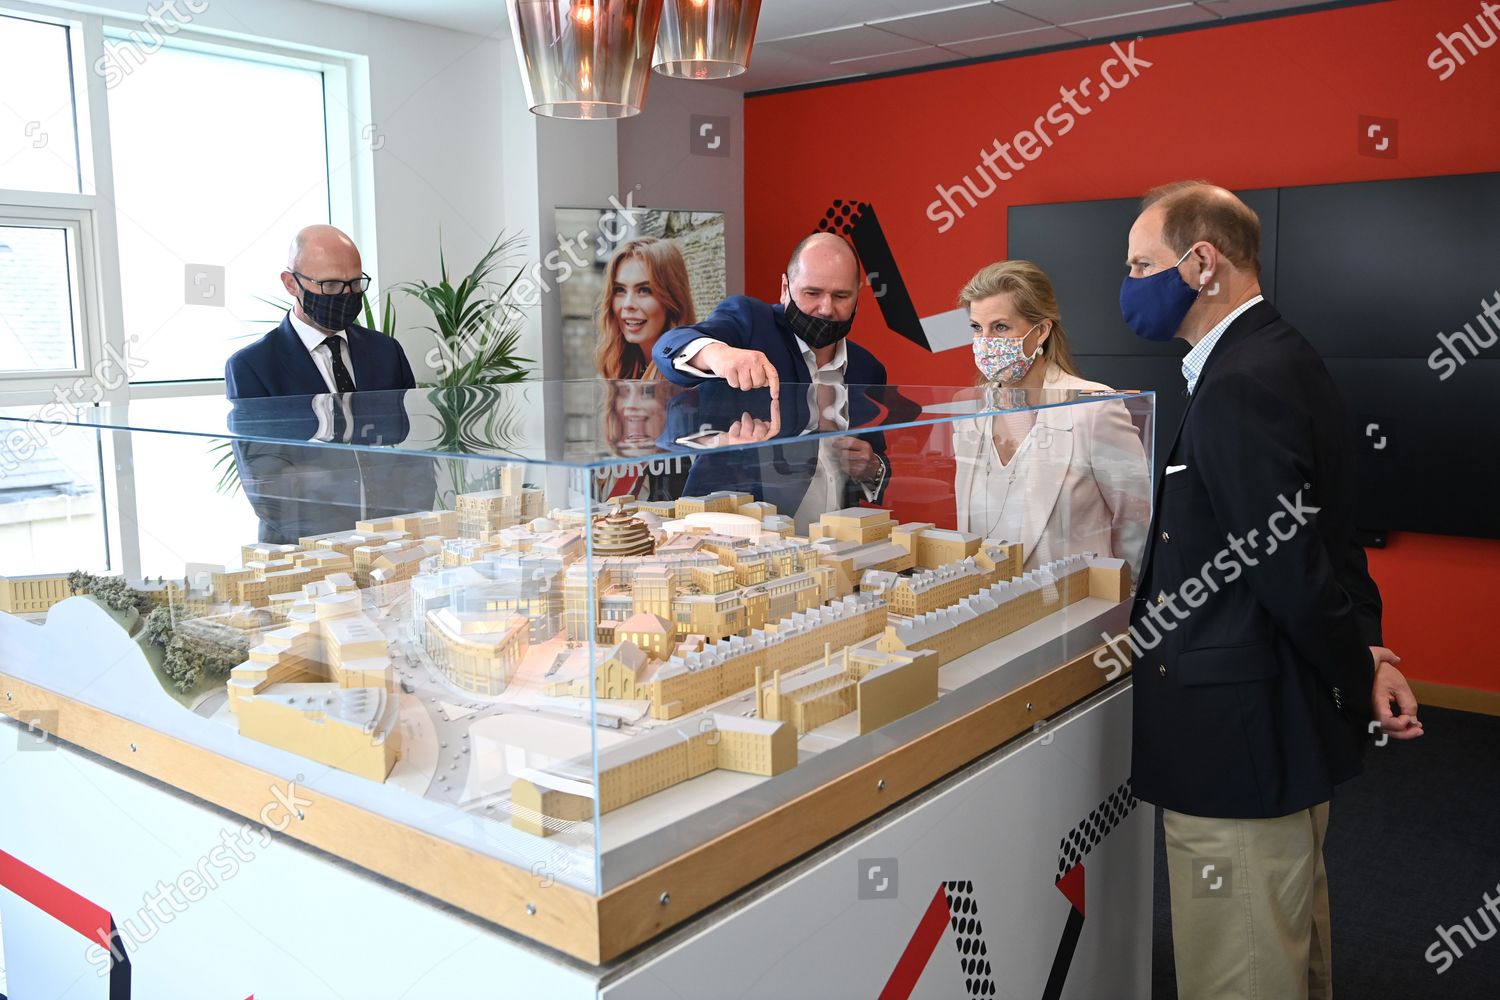 CASA REAL BRITÁNICA - Página 77 Prince-edward-and-sophie-countess-of-wessex-visit-to-edinburgh-scotland-uk-shutterstock-editorial-12173651t